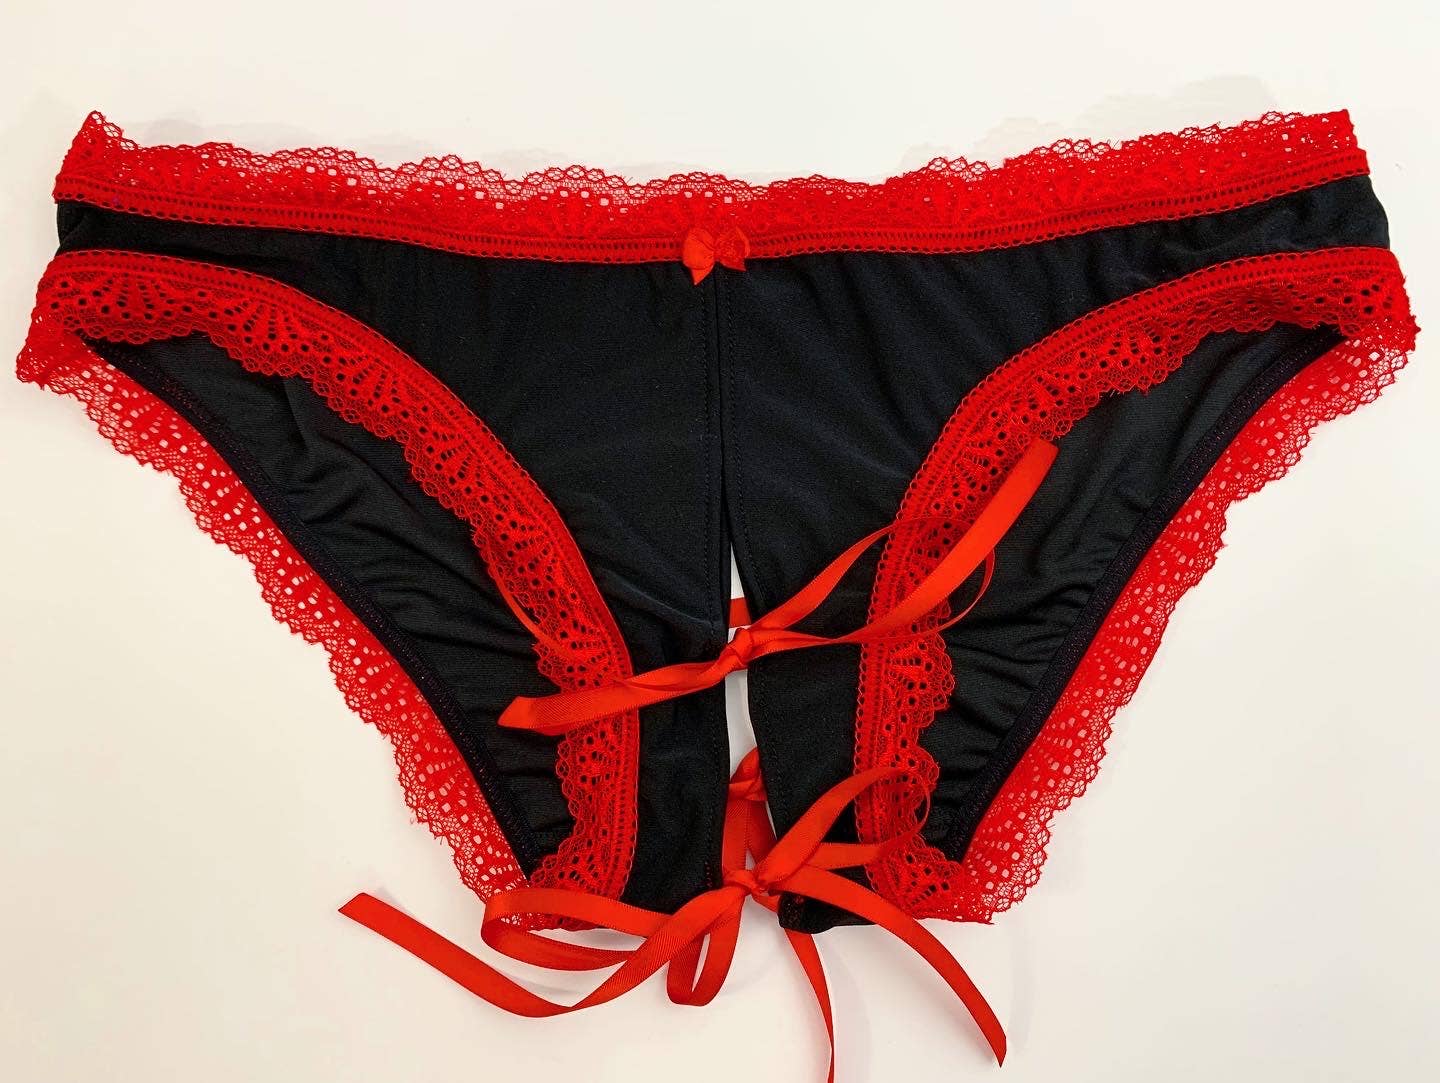 alexander katsman recommends Red Panties With Black Lace